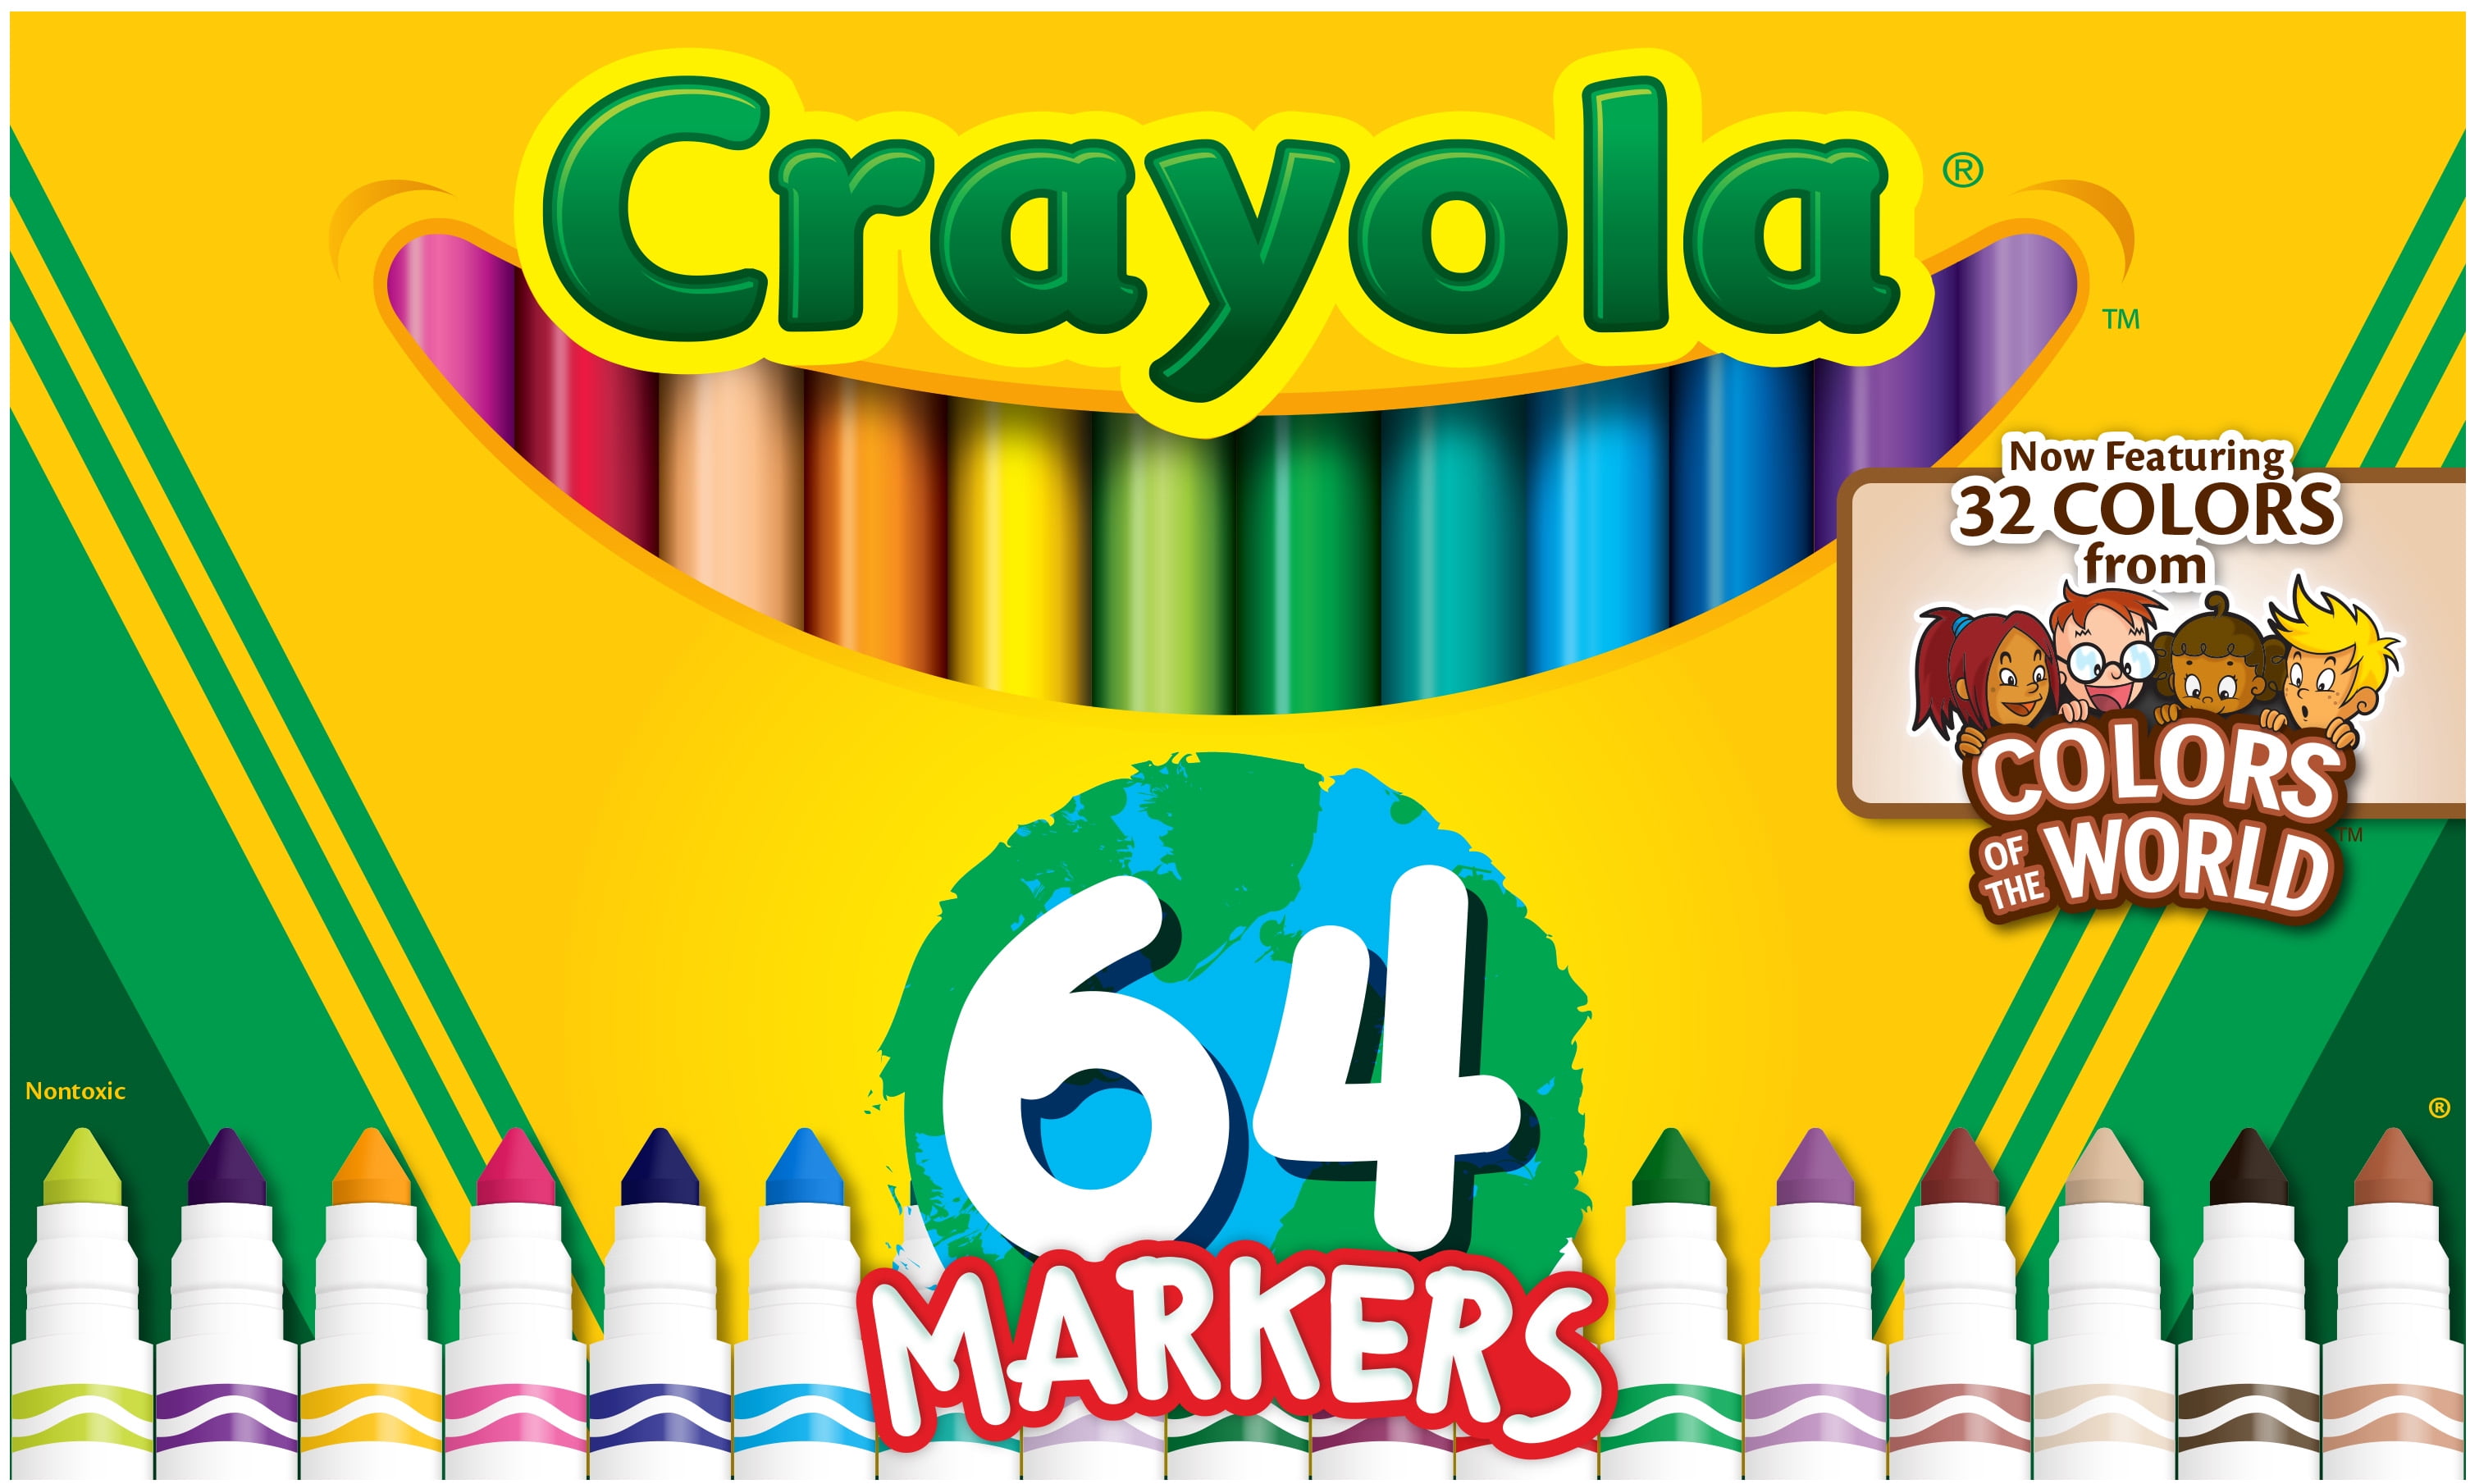 Washable Skinny Markers Pack of 64 set of 64 (pack of 2)